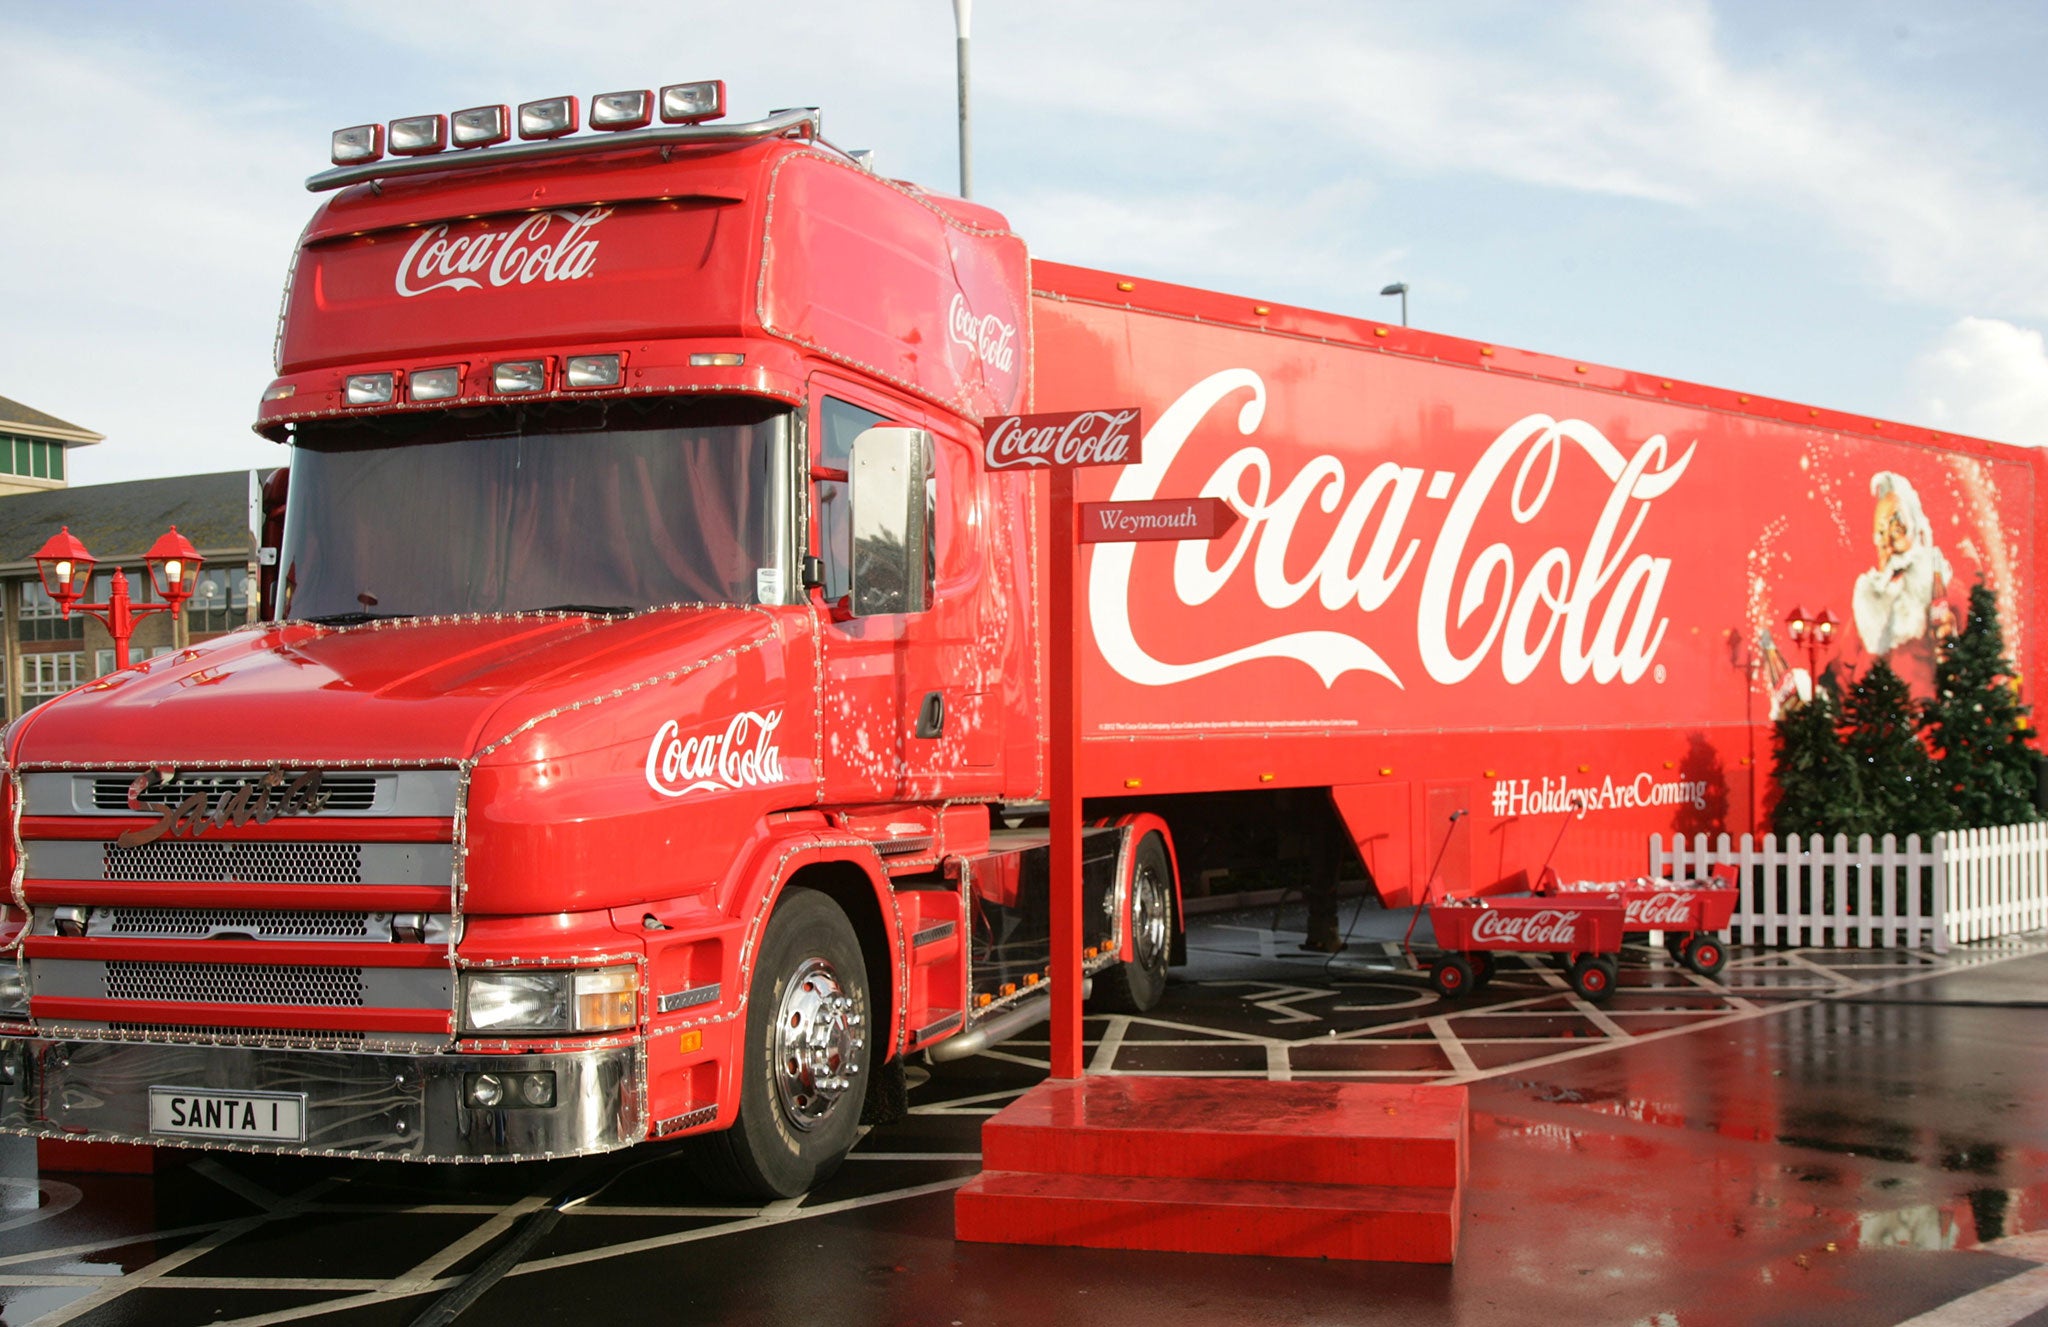 The Coca-Cola van, which will be touring Britain in the buildup to Christmas